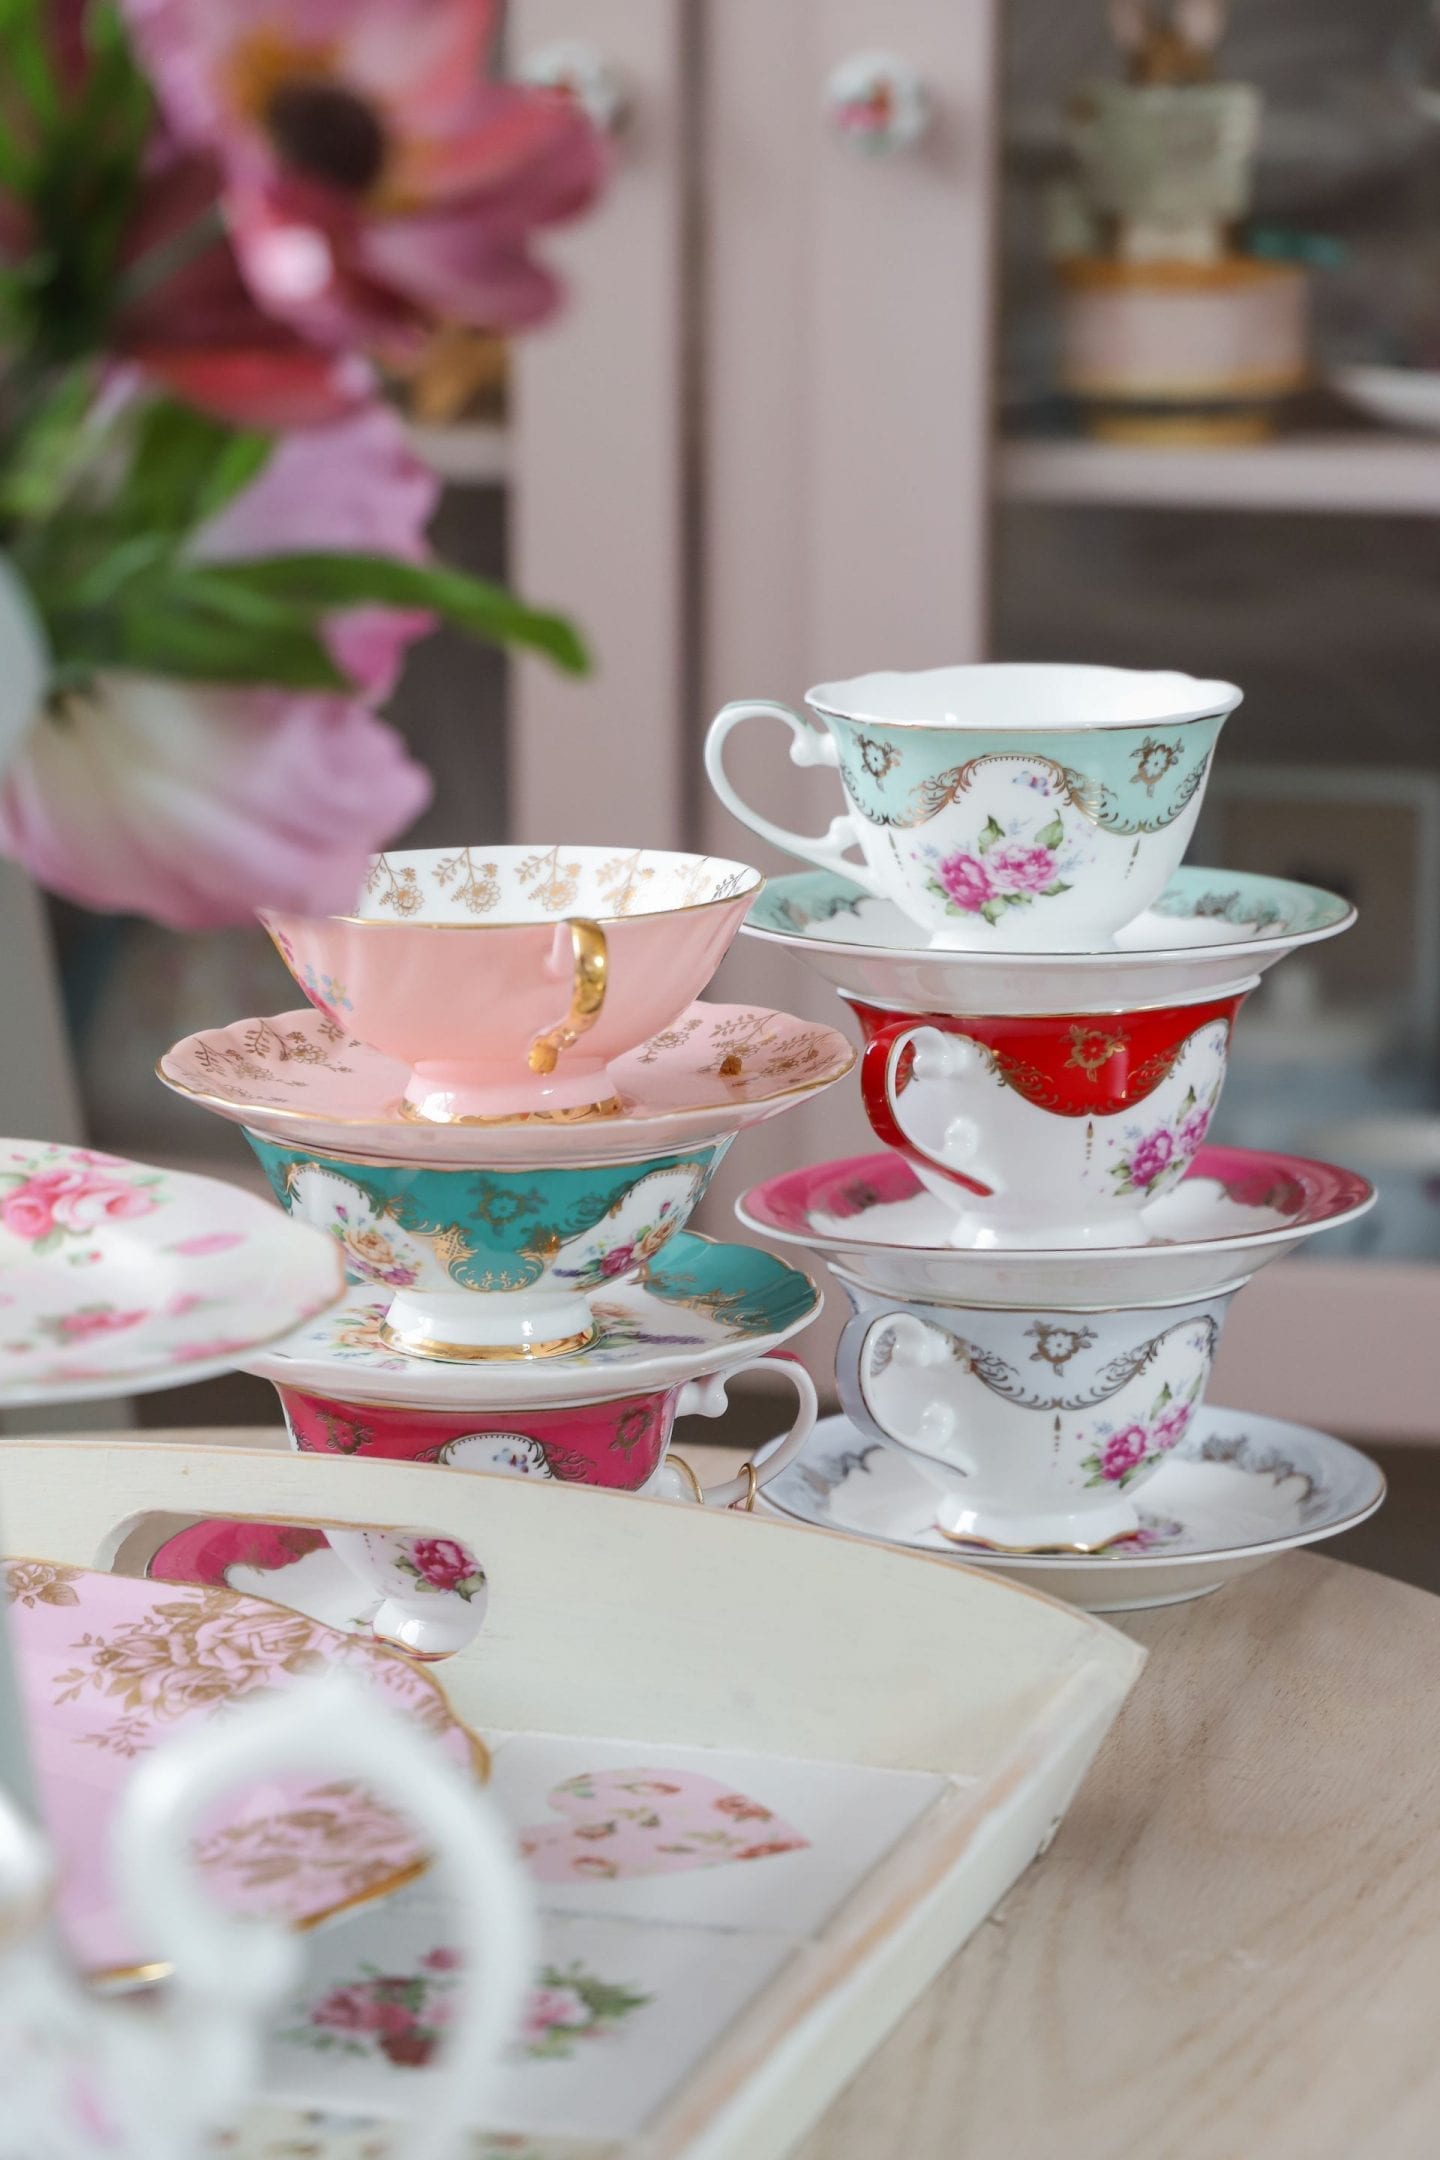 How to display your china teacups